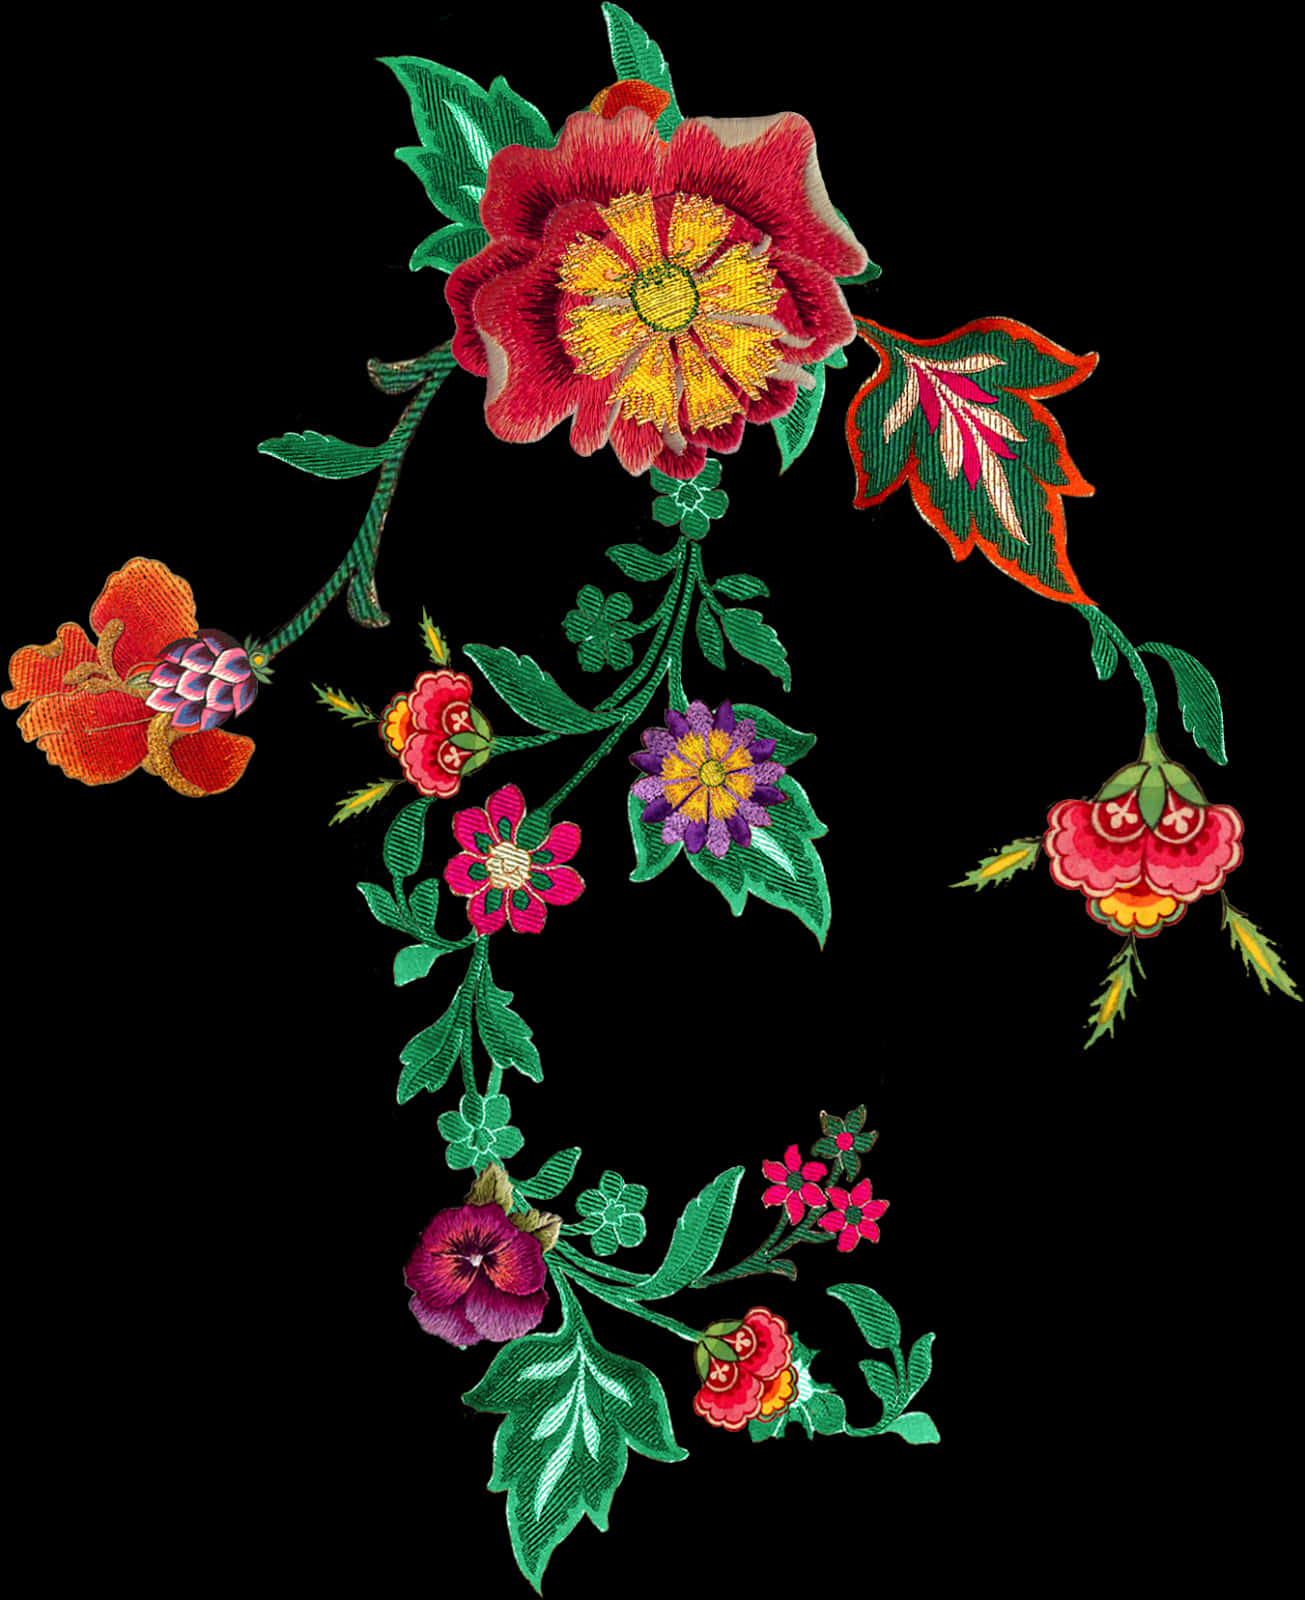 A Colorful Flower Embroidery On A Black Background